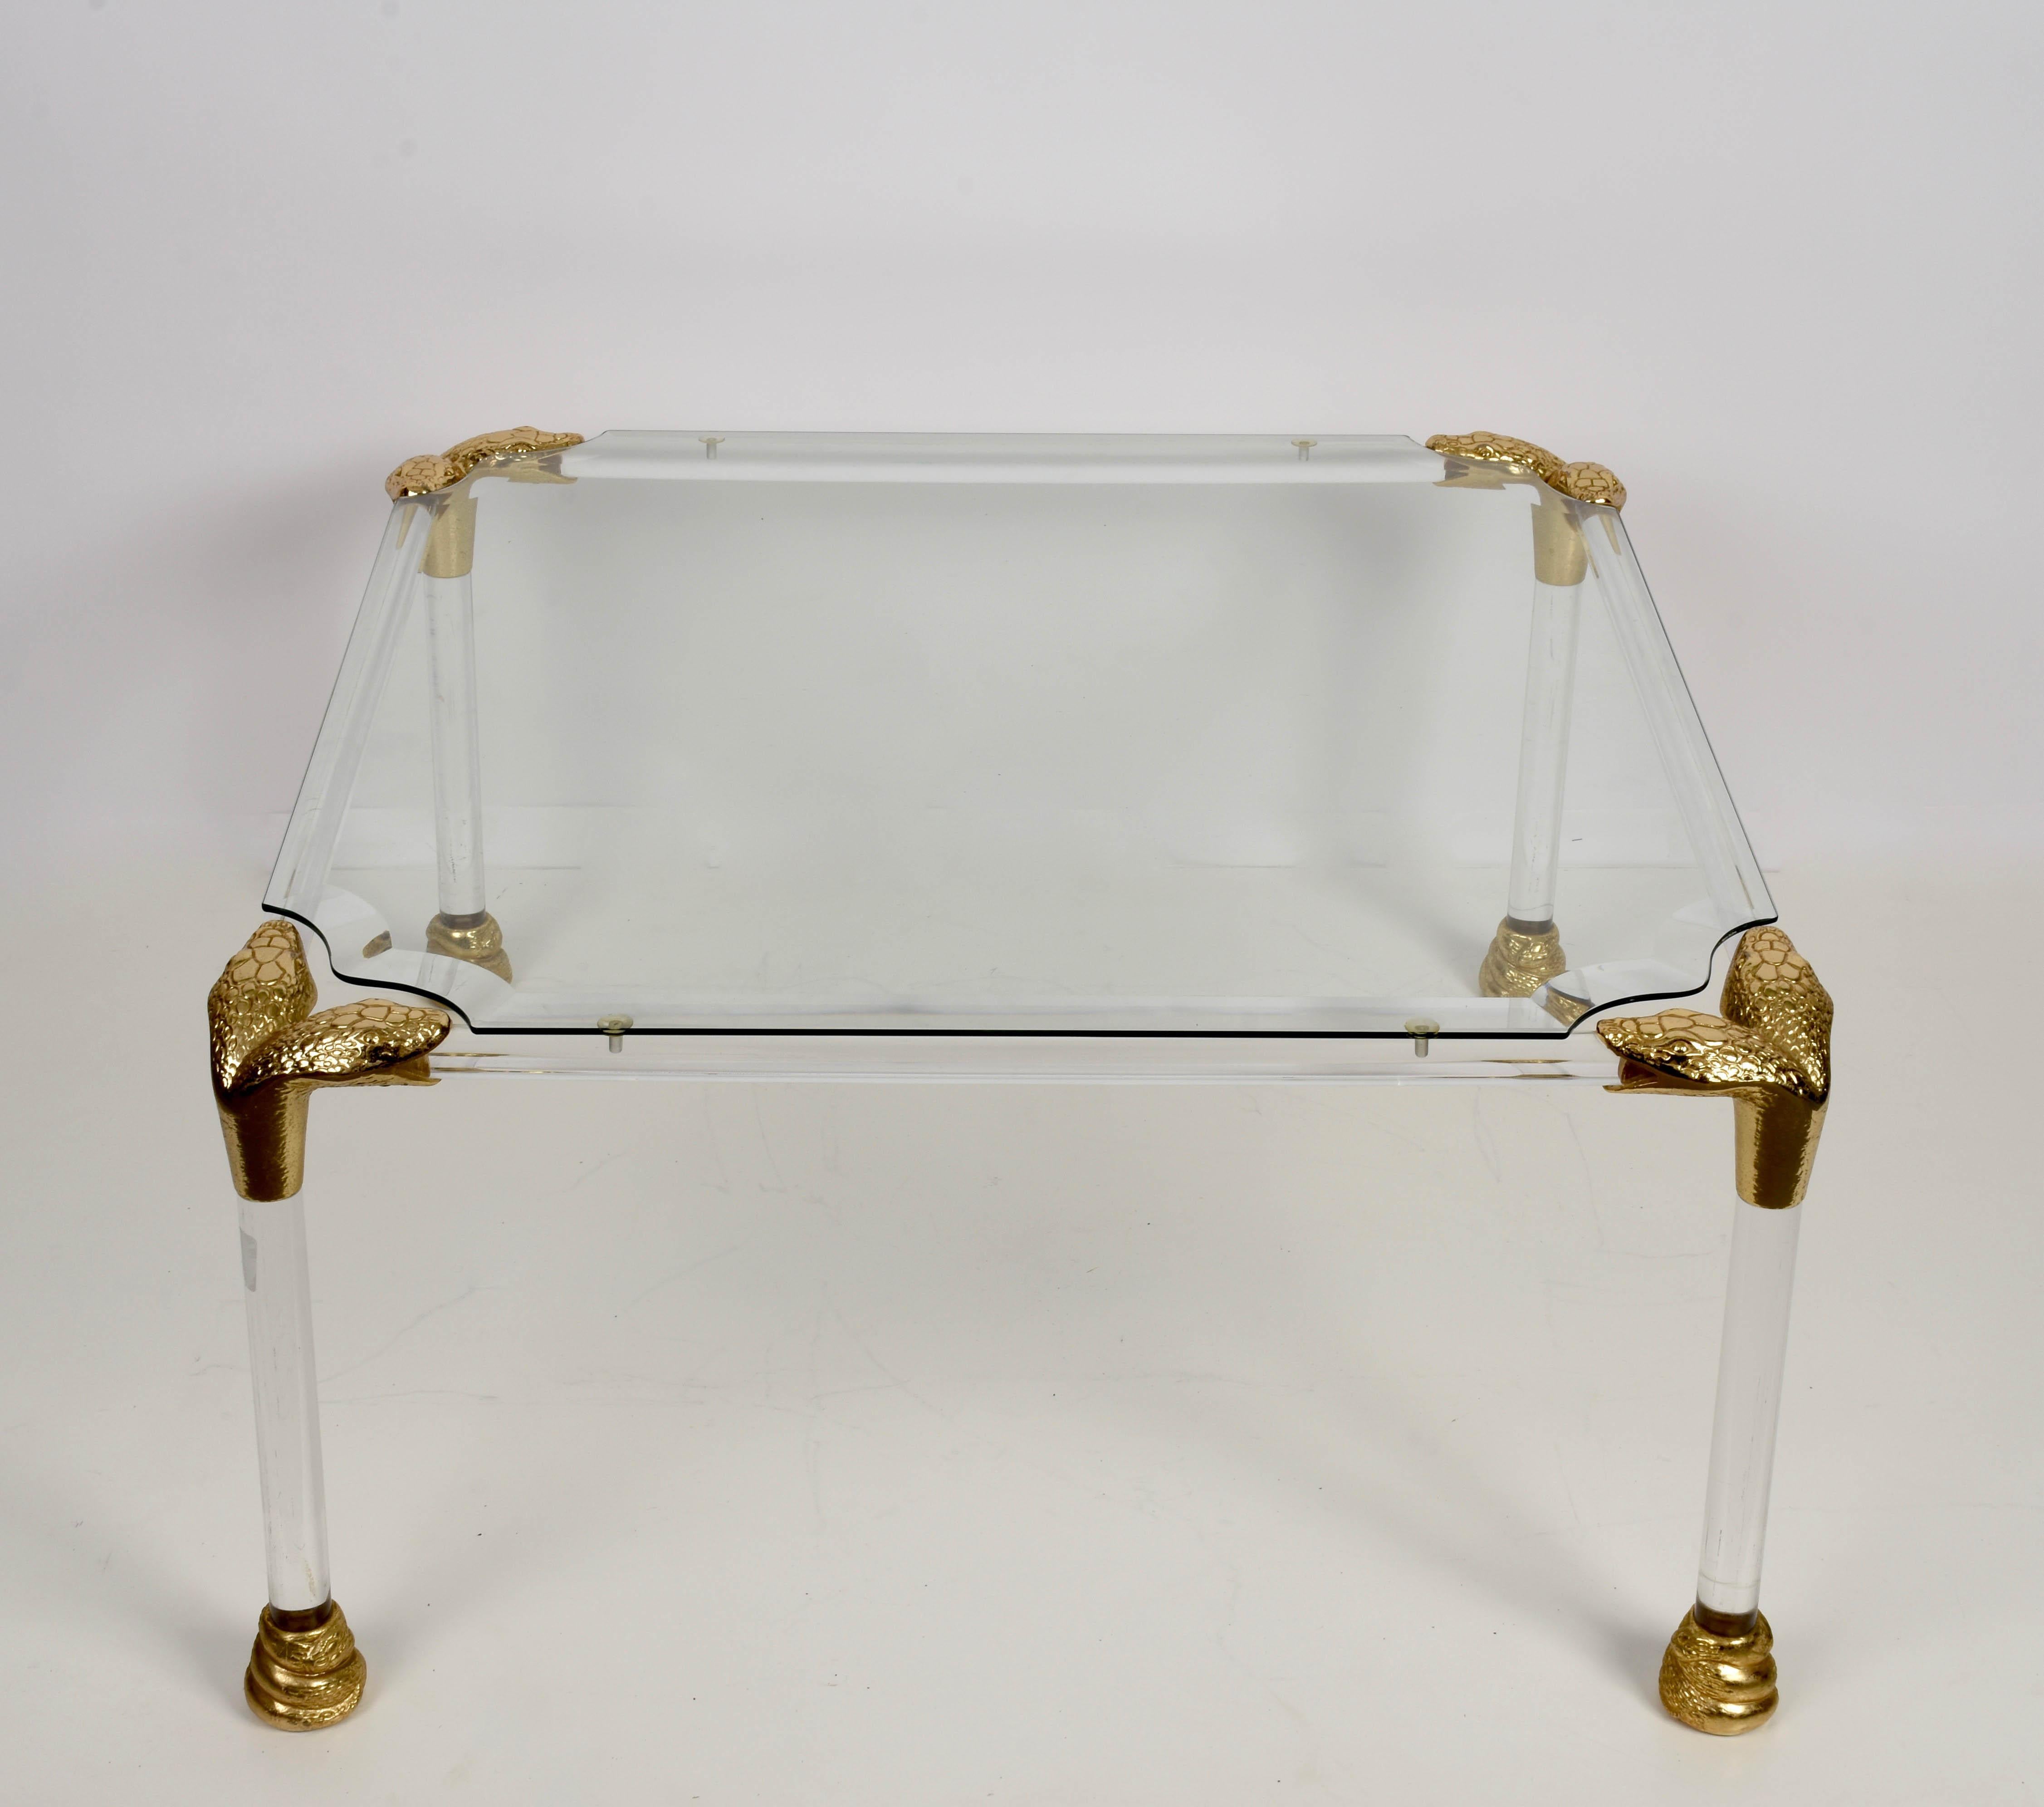 Mid-Century Modern Midcentury Lucite and Brass Italian Coffee Table with Snake Head Details, 1970s For Sale